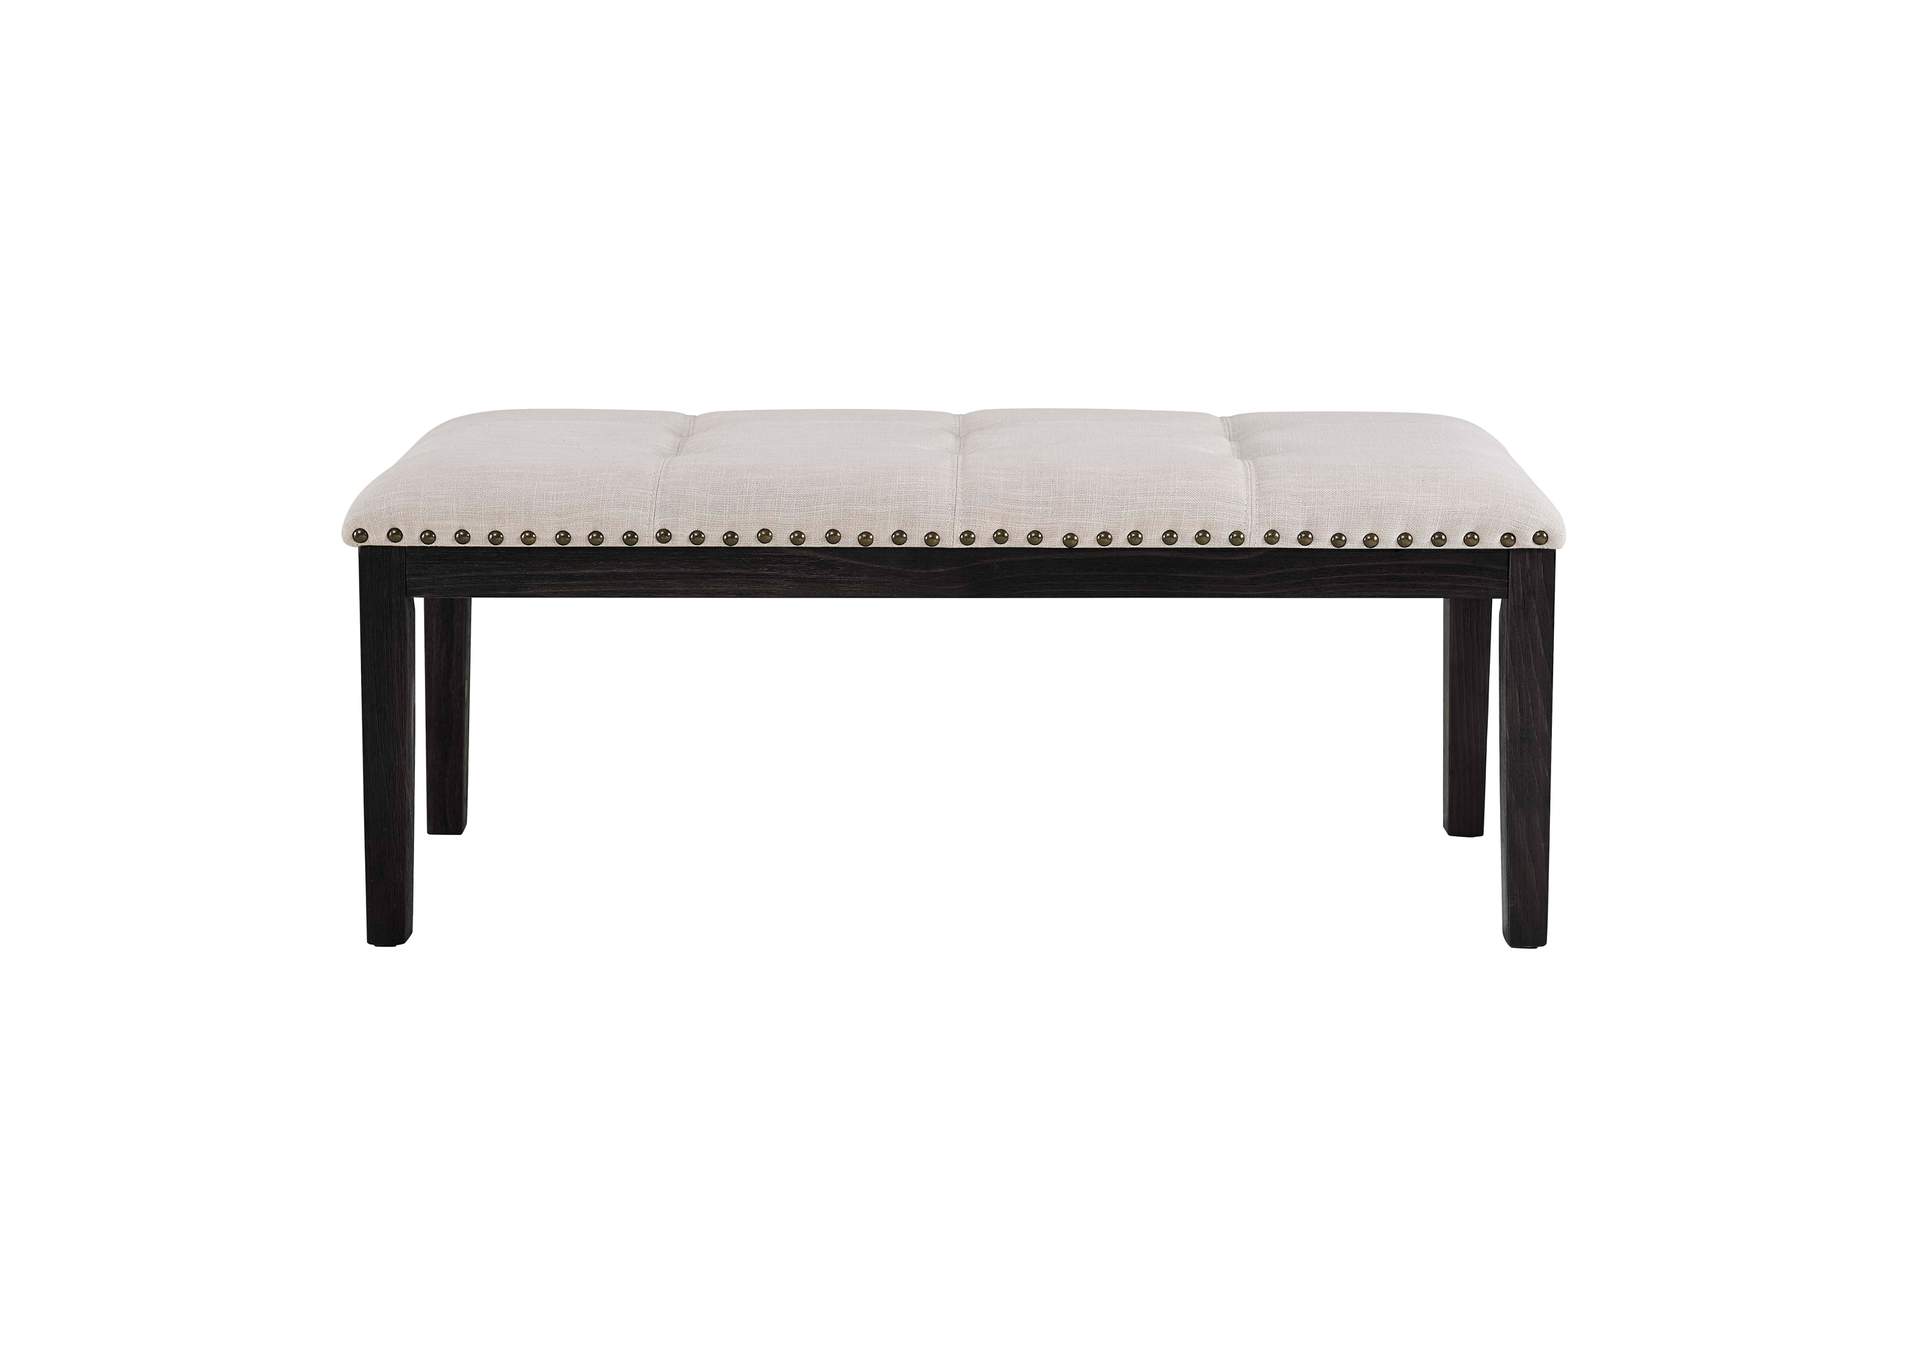 Greystone Marble Dining Bench,Elements